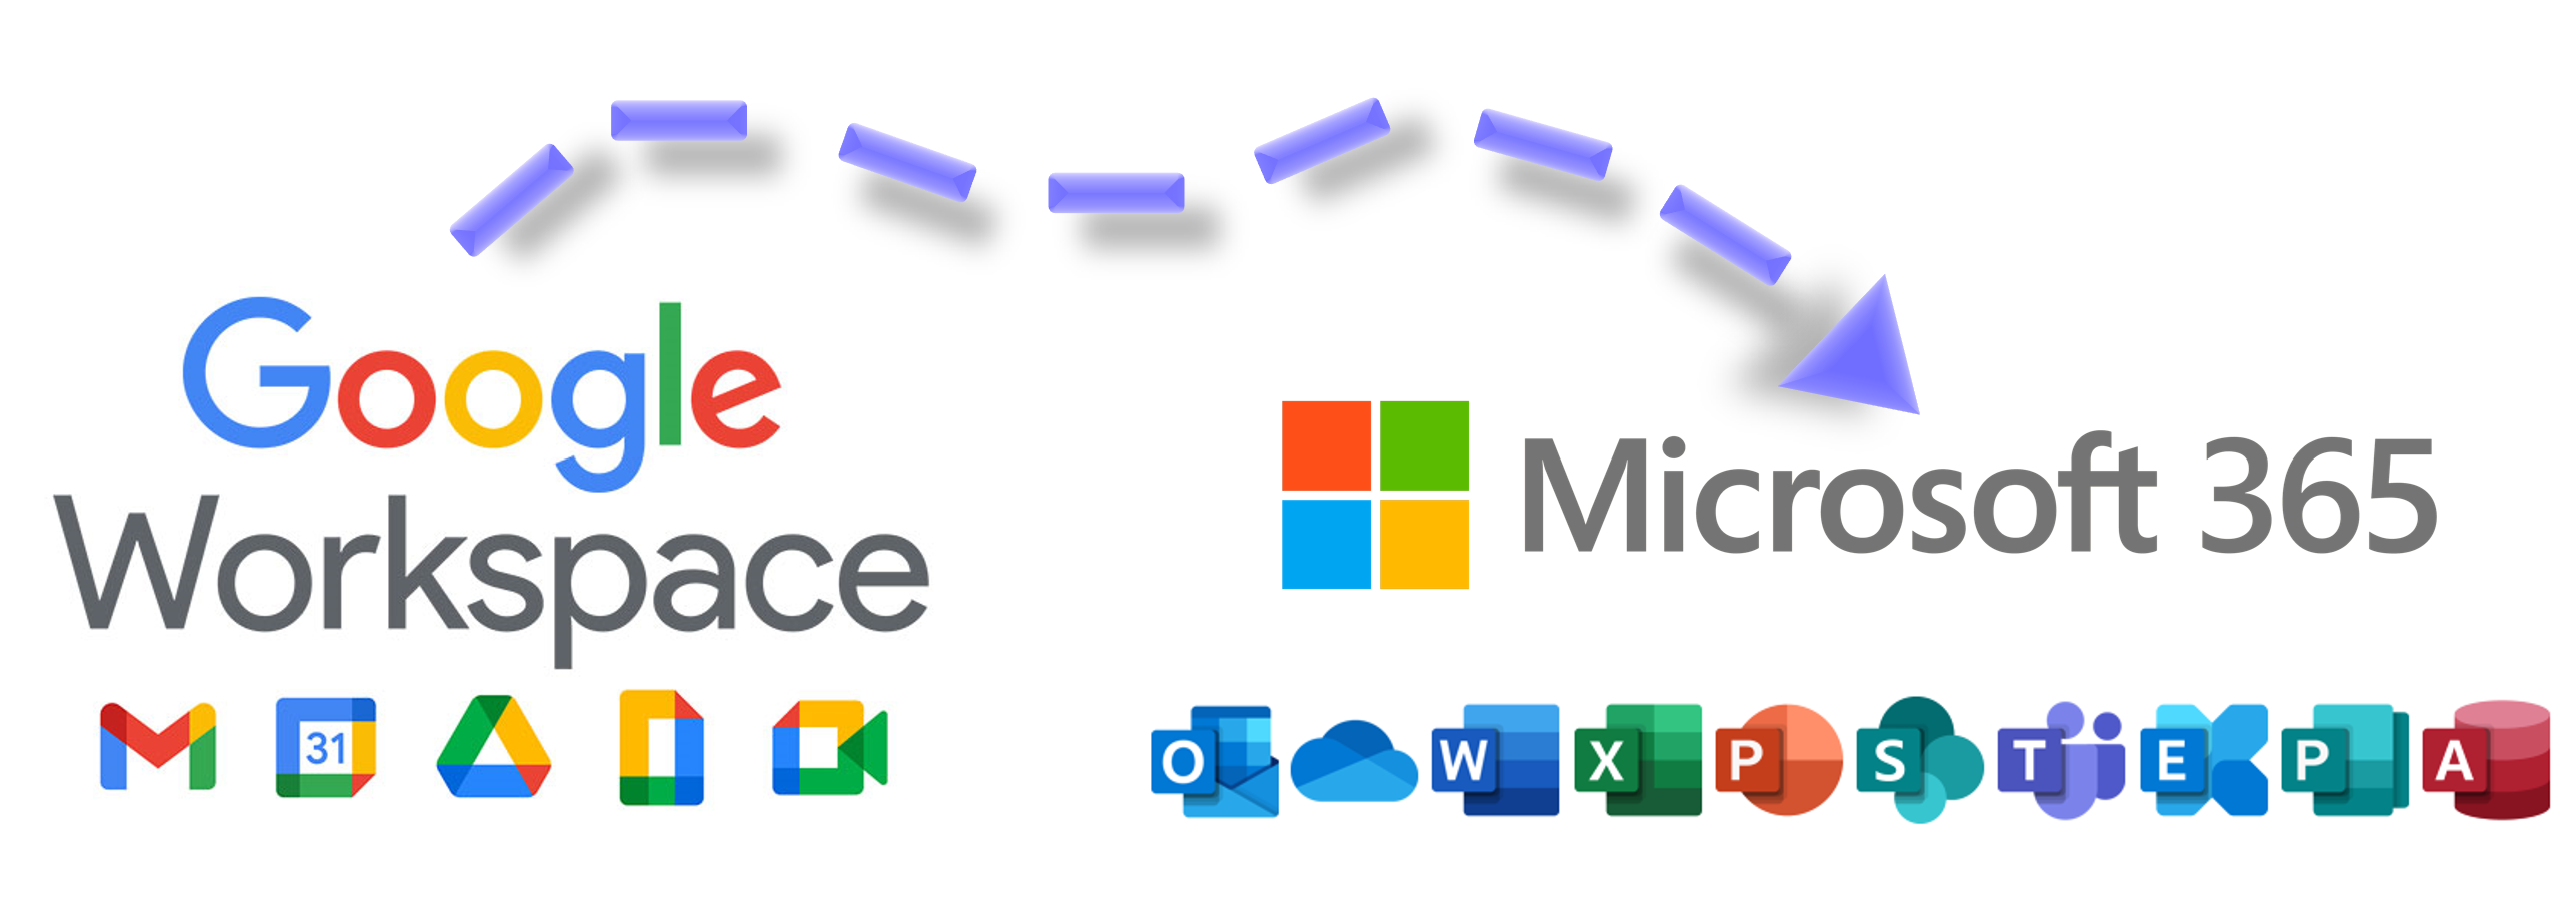 The problem with the Microsoft Migration ending.